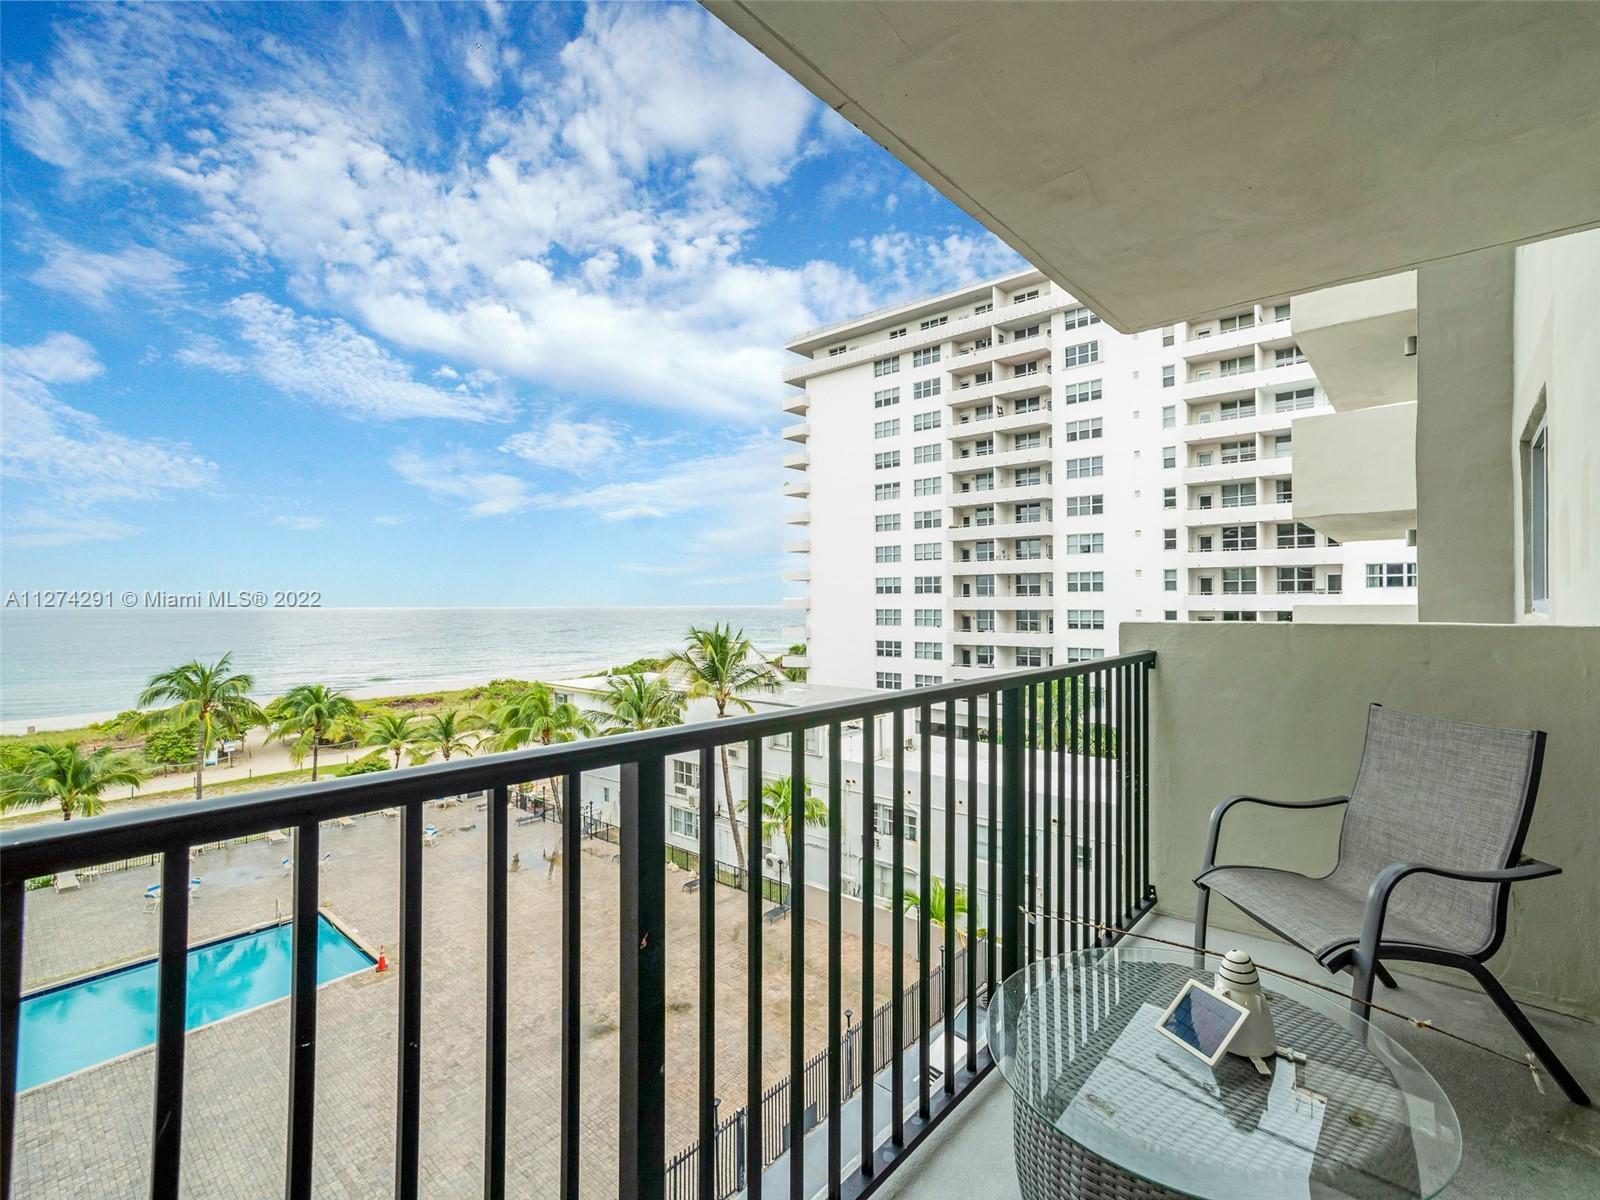 Beautiful ocean view, well maintained unit in the Manatee condominium, Surfside. Remodeled kitchen a